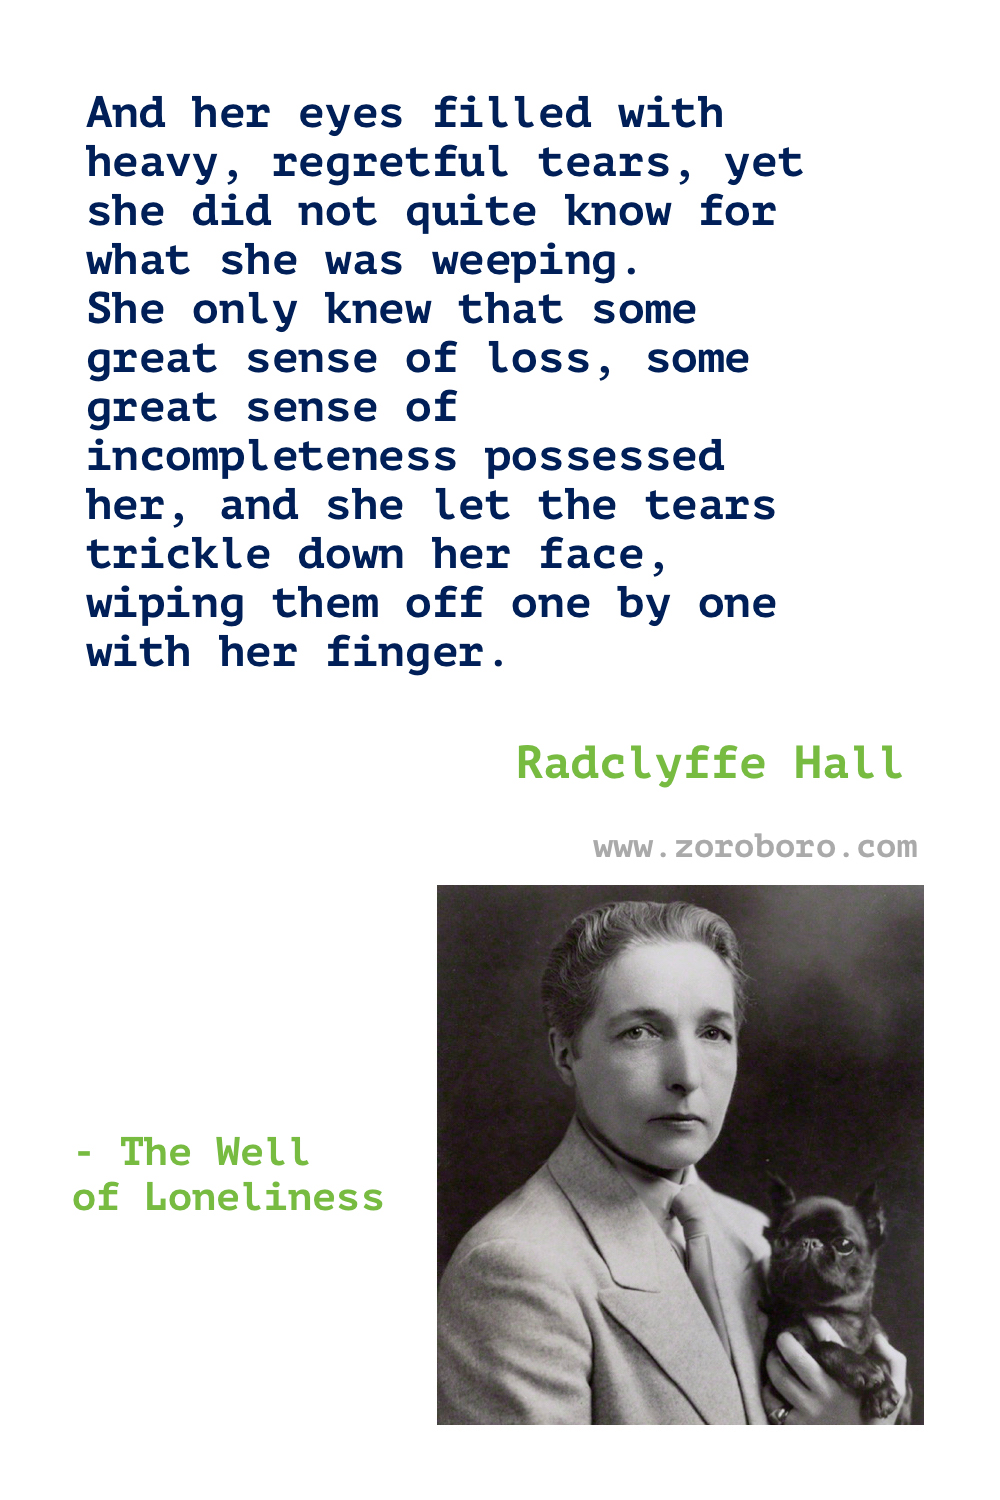 Radclyffe Hall Quotes. Radclyffe Hall Poems. Radclyffe Hall The Well of Loneliness Quotes. Radclyffe Hall Books Quotes. Radclyffe Hall